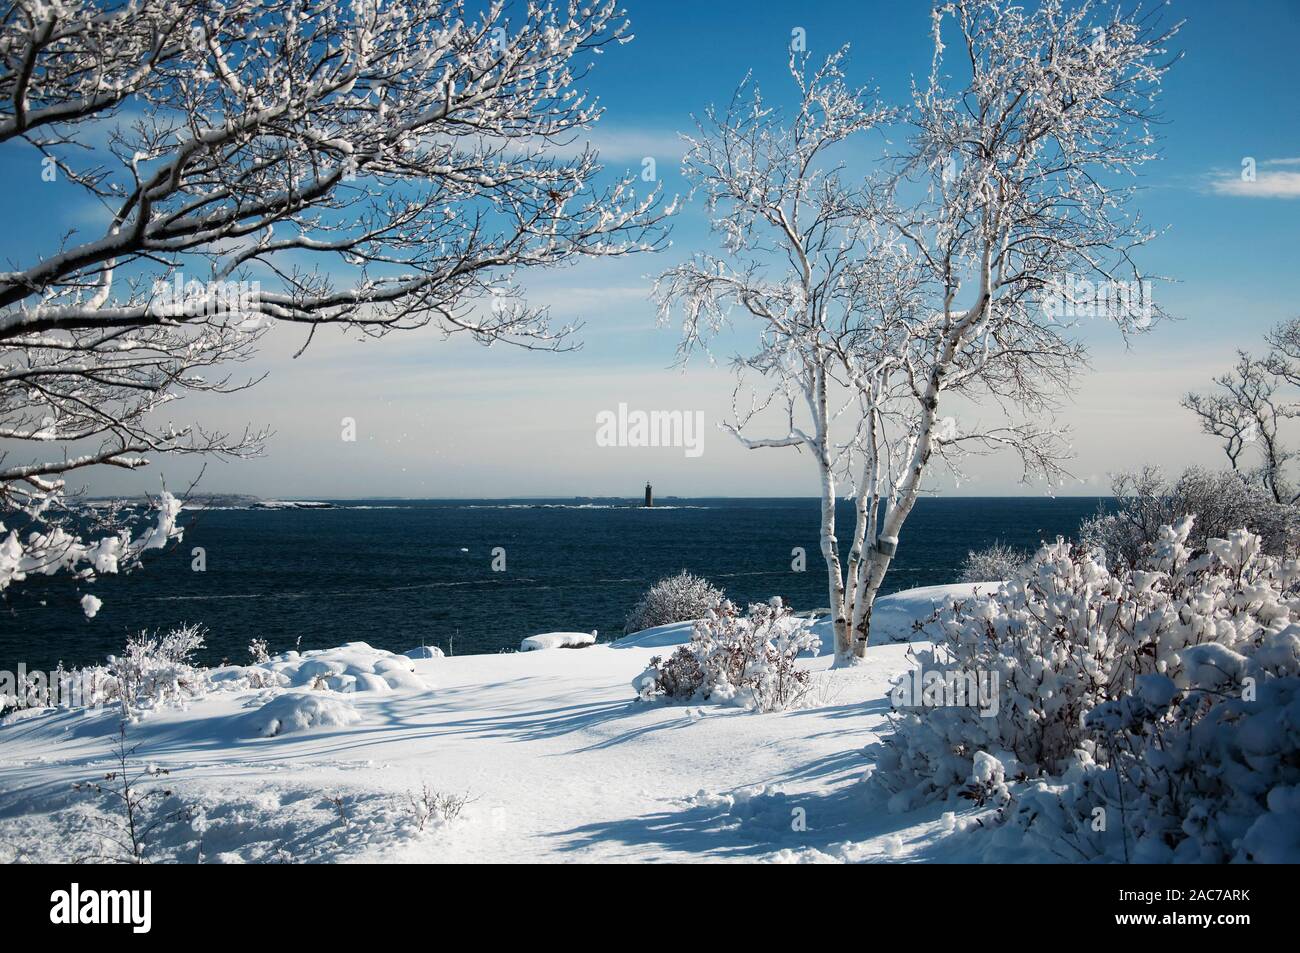 The snow covered rocky coastline at Fort Williams Park and ram island ledge light station in portland Maine on a sunny blue sky day. Stock Photo